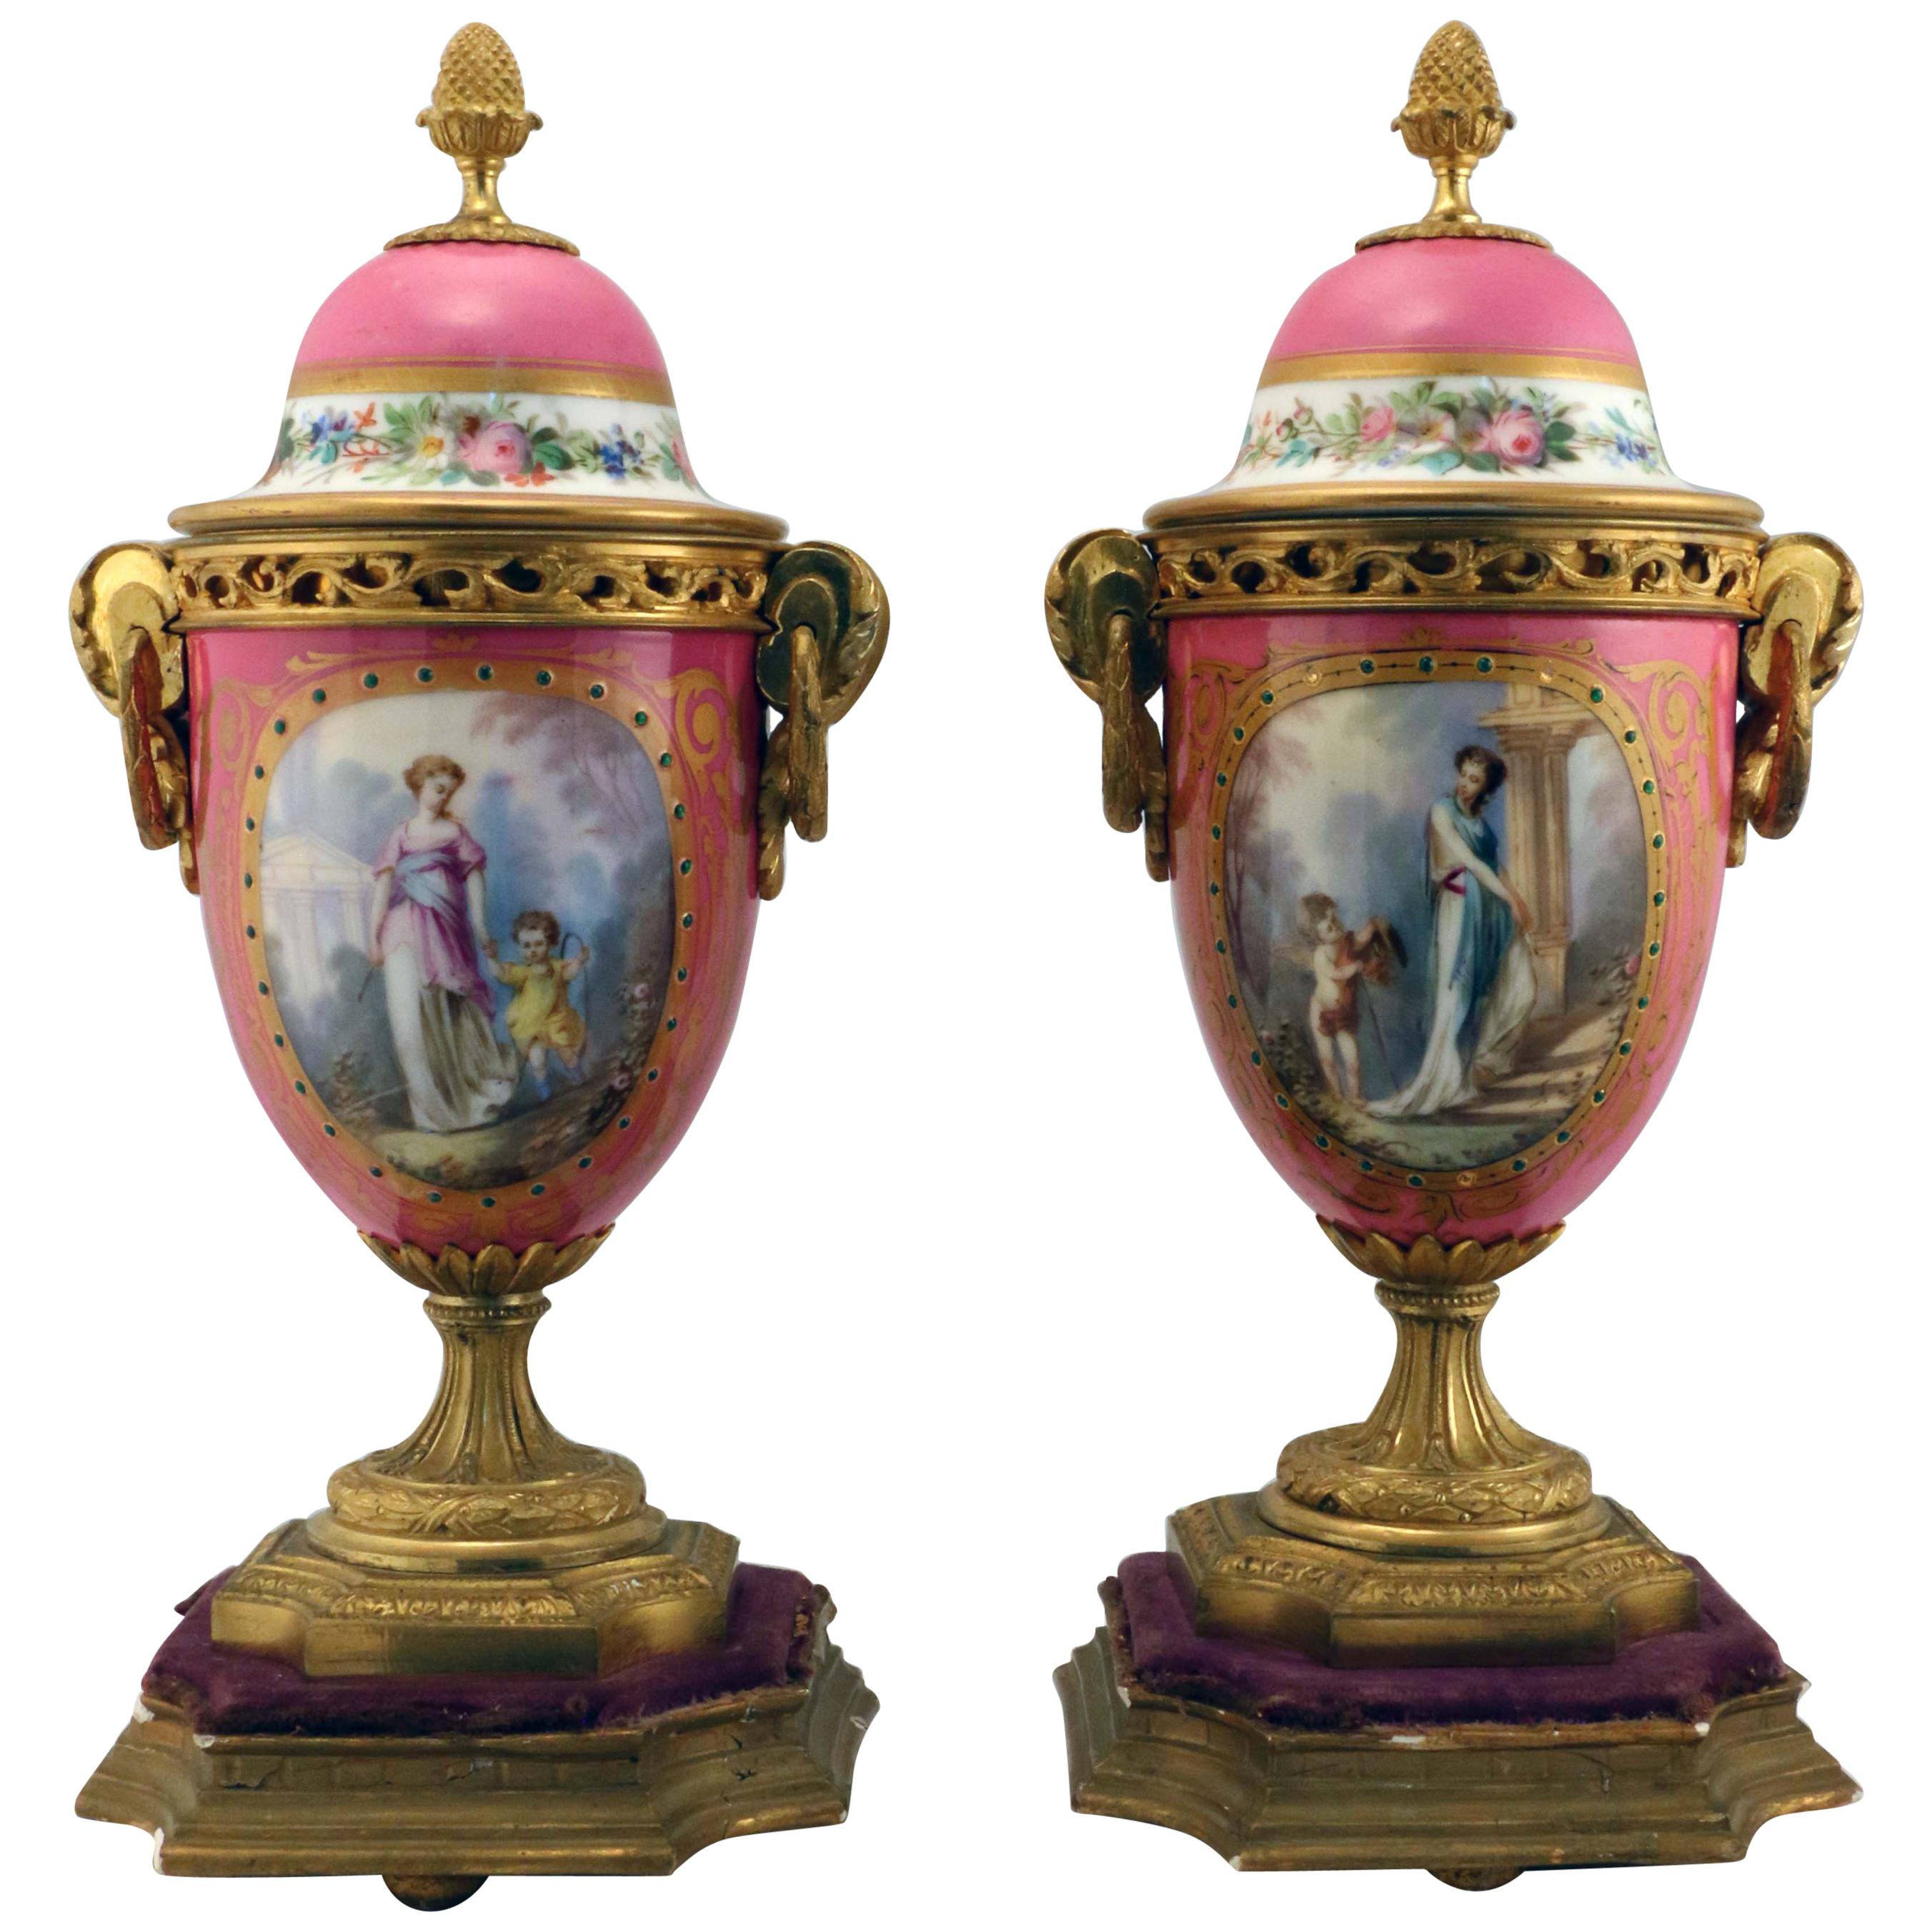 Pair of Louis XV Style Gilt Bronze Mounted Paris Pink Porcelain Covered Urns For Sale